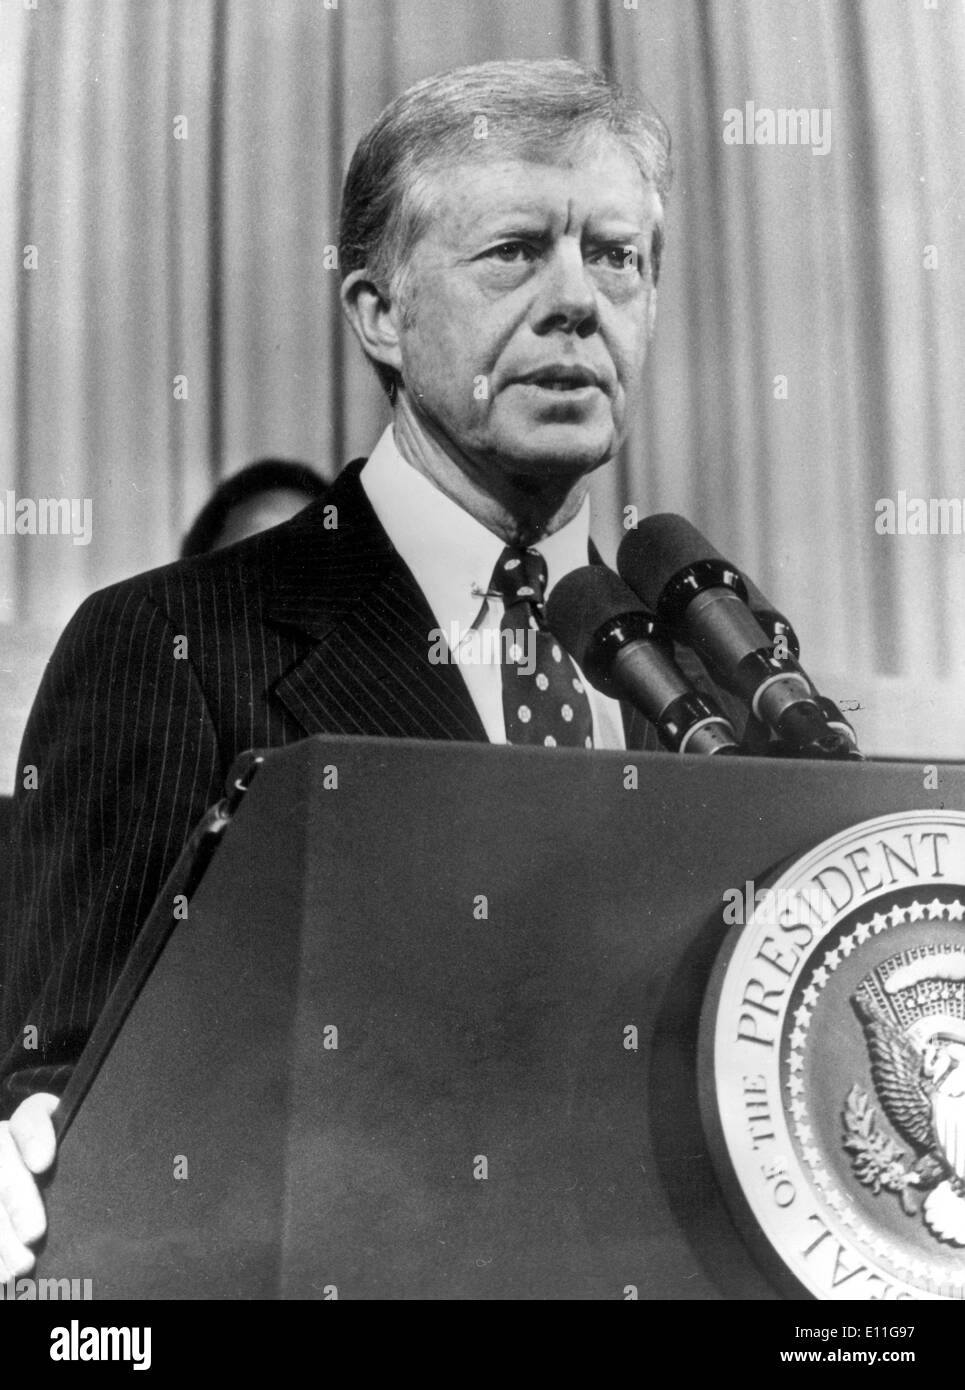 The 39th President of the United States JIMMY CARTER gives a speech Stock Photo